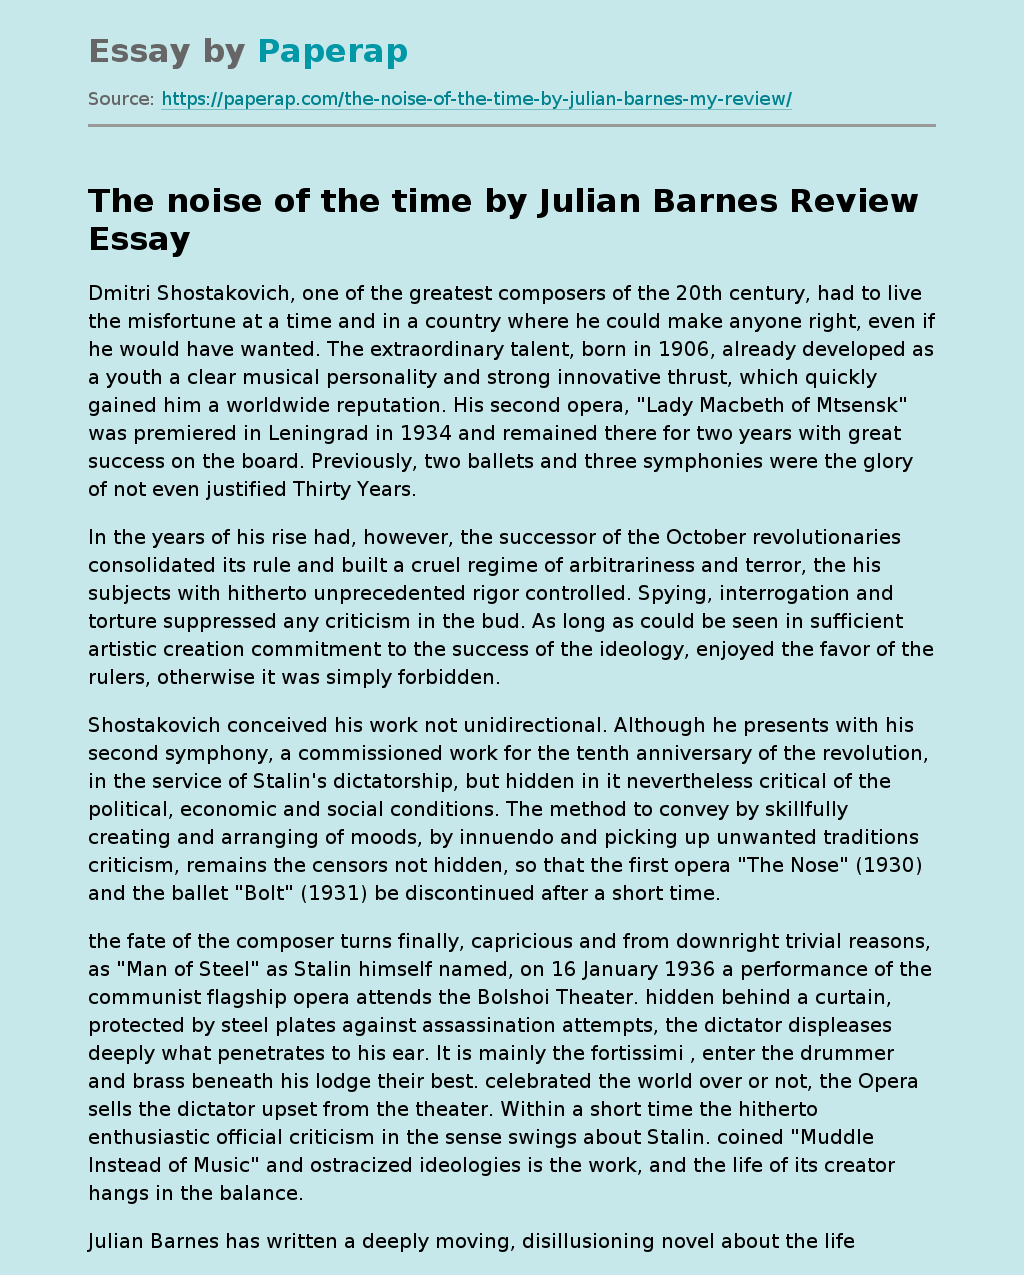 “The Noise of the Time” by Julian Barnes